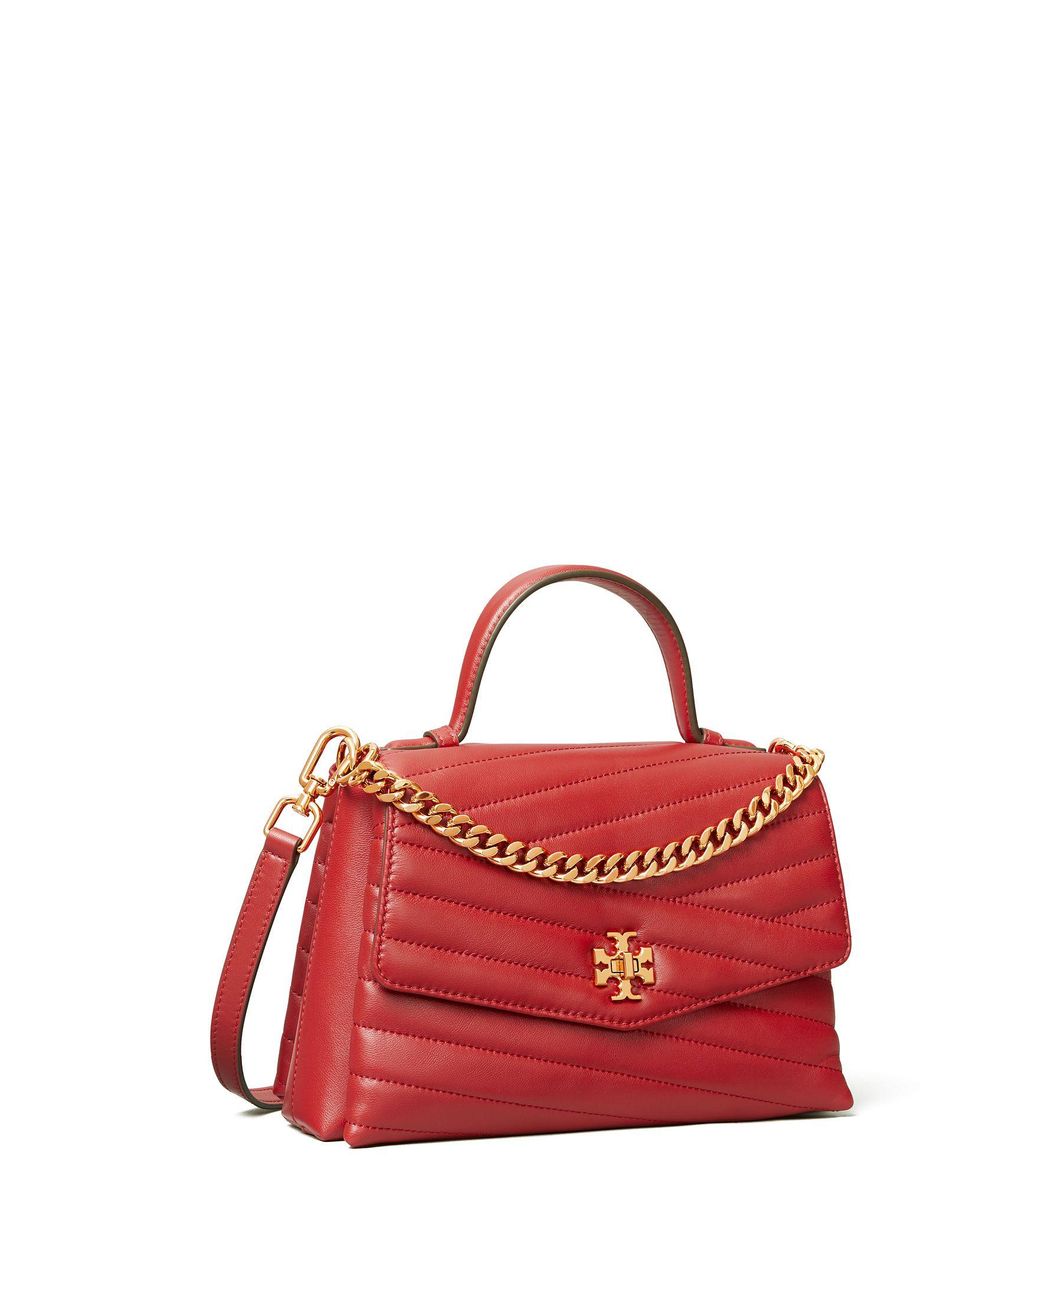 Tory Burch Kira Small Chevron Leather Top Handle Bag in Red